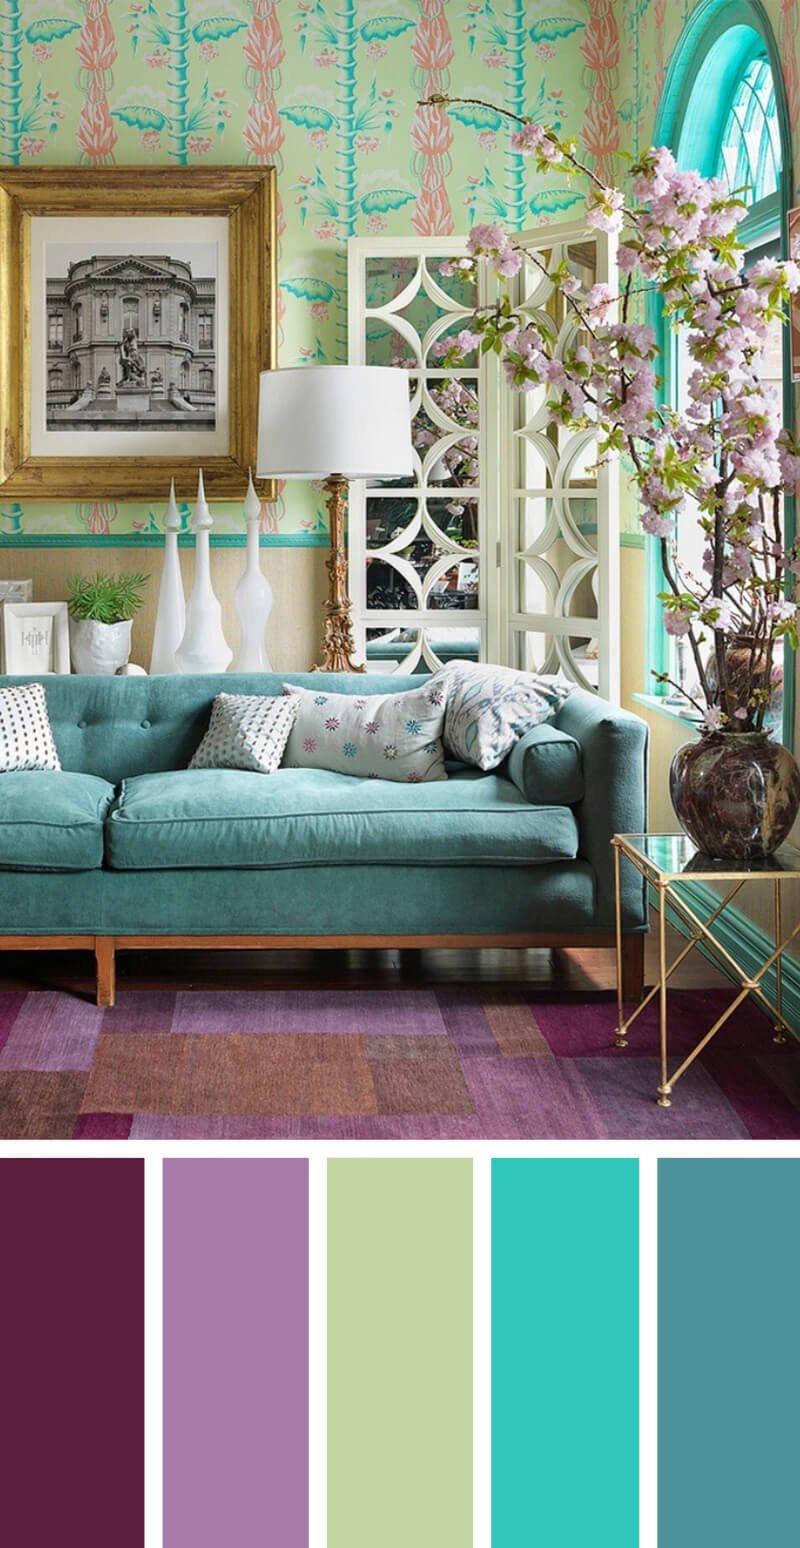 7 Best Living Room Color Scheme Ideas and Designs for 2021